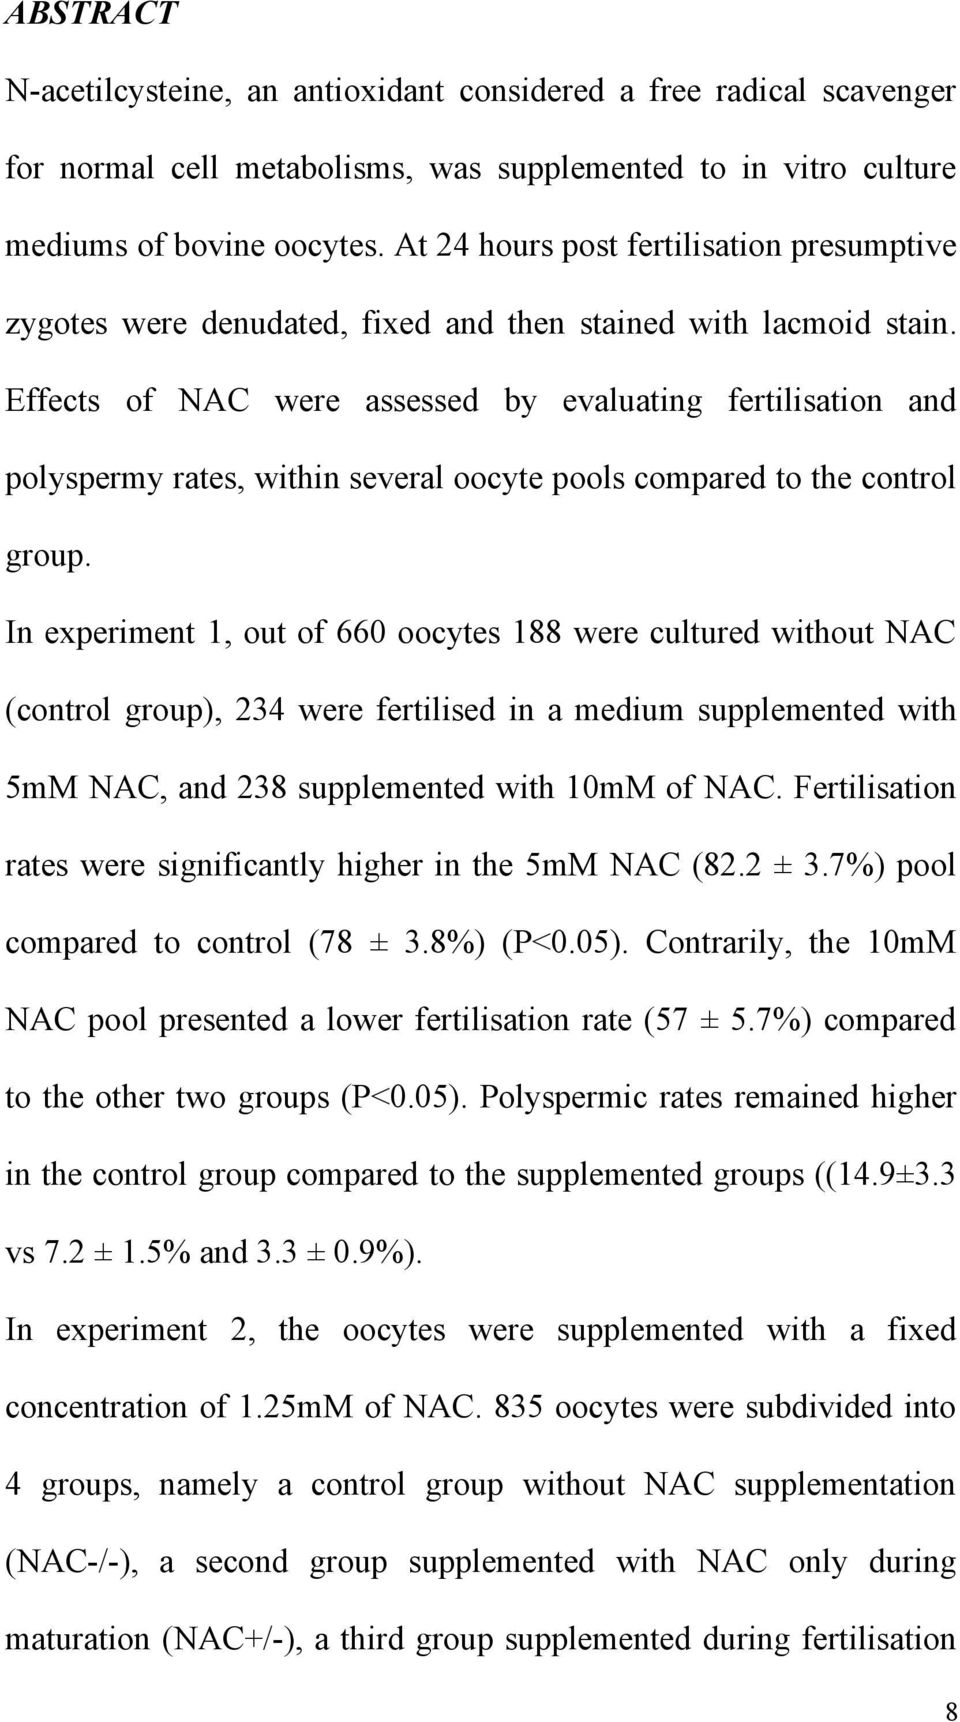 Effects of NAC were assessed by evaluating fertilisation and polyspermy rates, within several oocyte pools compared to the control group.